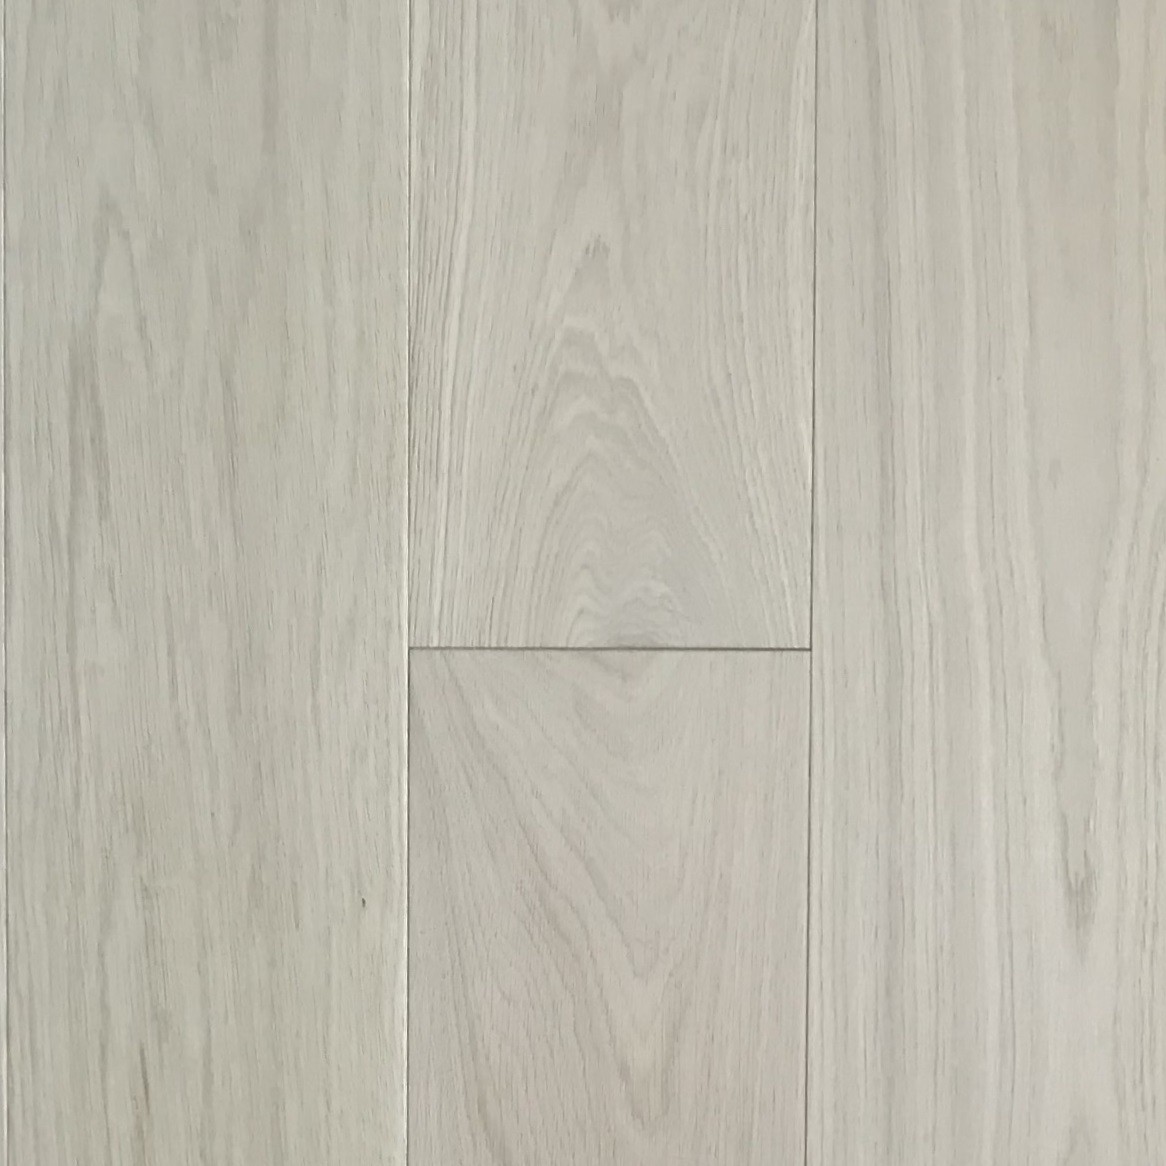 LIVIGNA ENGINEERED WOOD FLOORING OAK BRUSHED INVISIBLE LACQUERED  190x1900mm